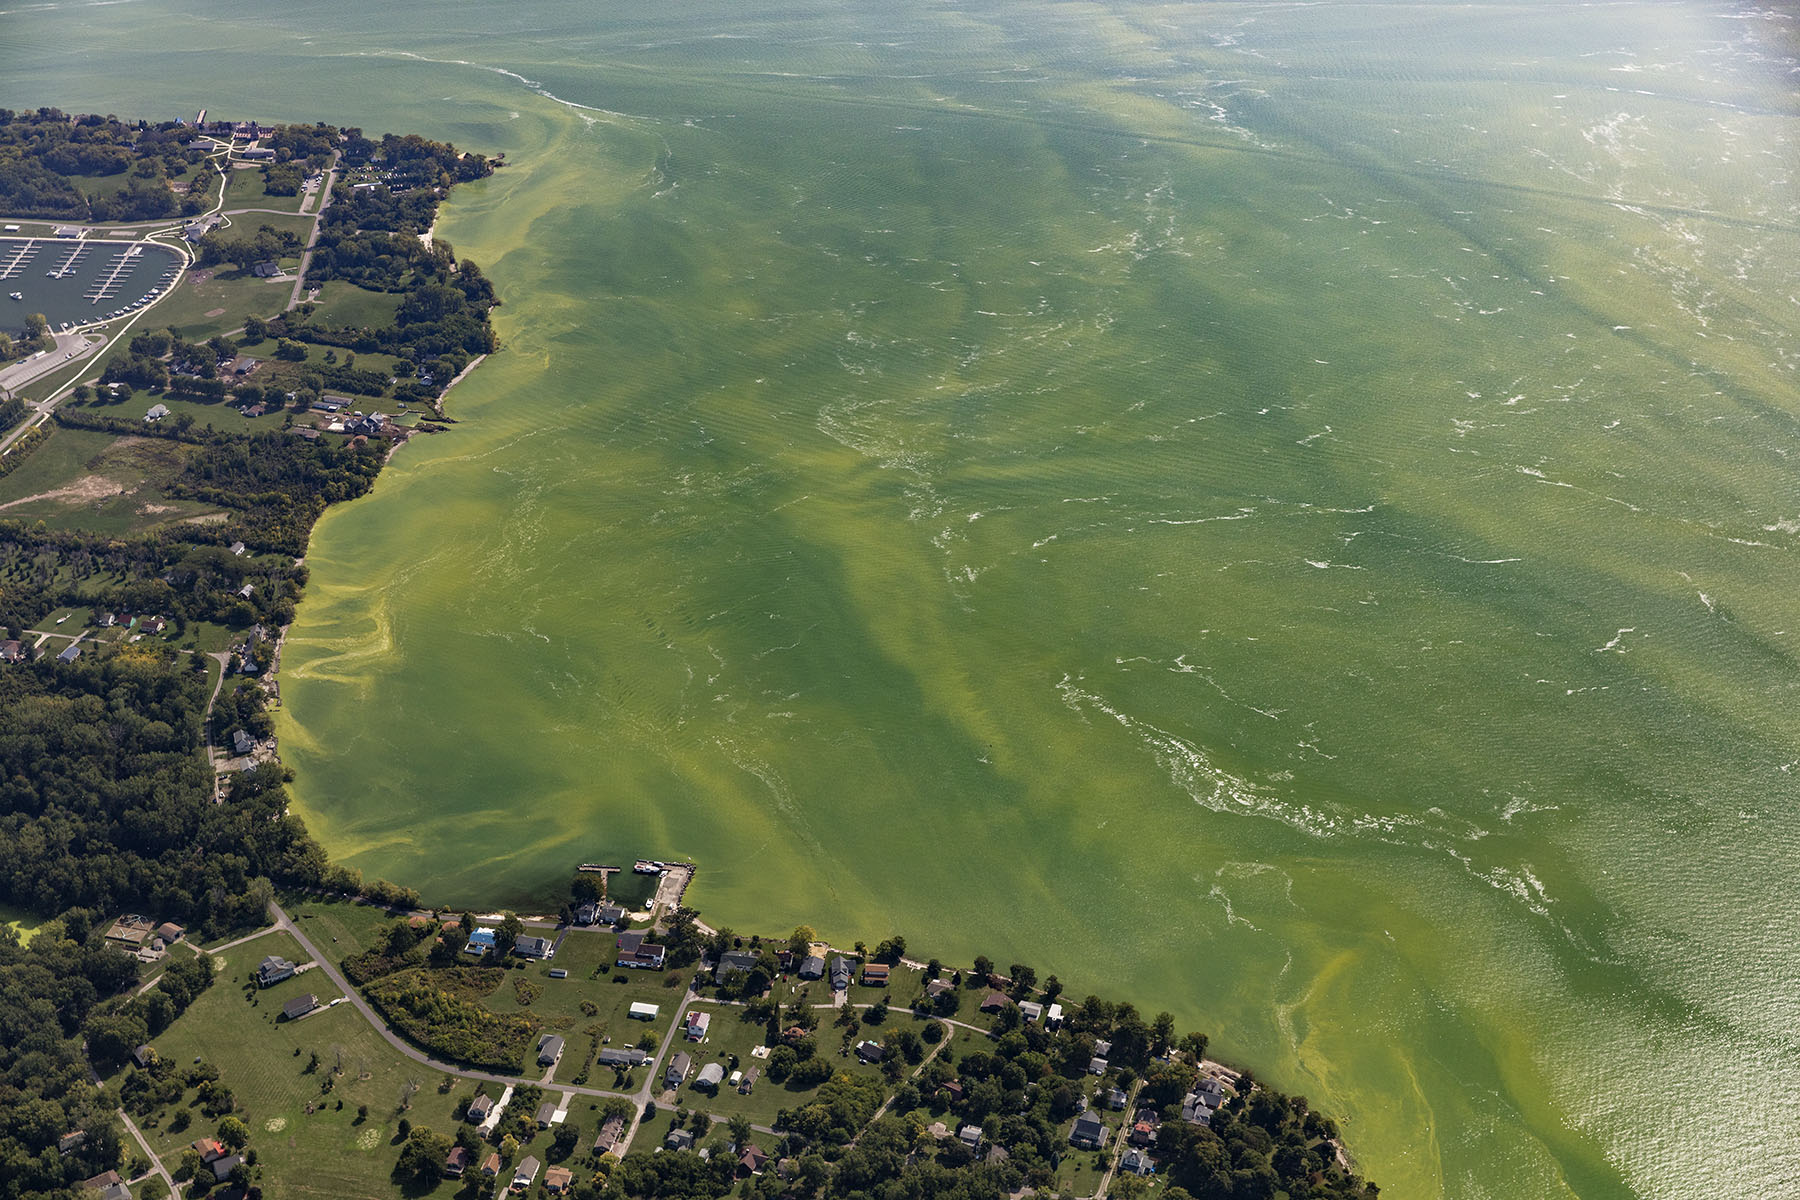 Aerial view of Lake Erie showing a residential area along the shoreline and green water that is affected by a large algal bloom in the lake.